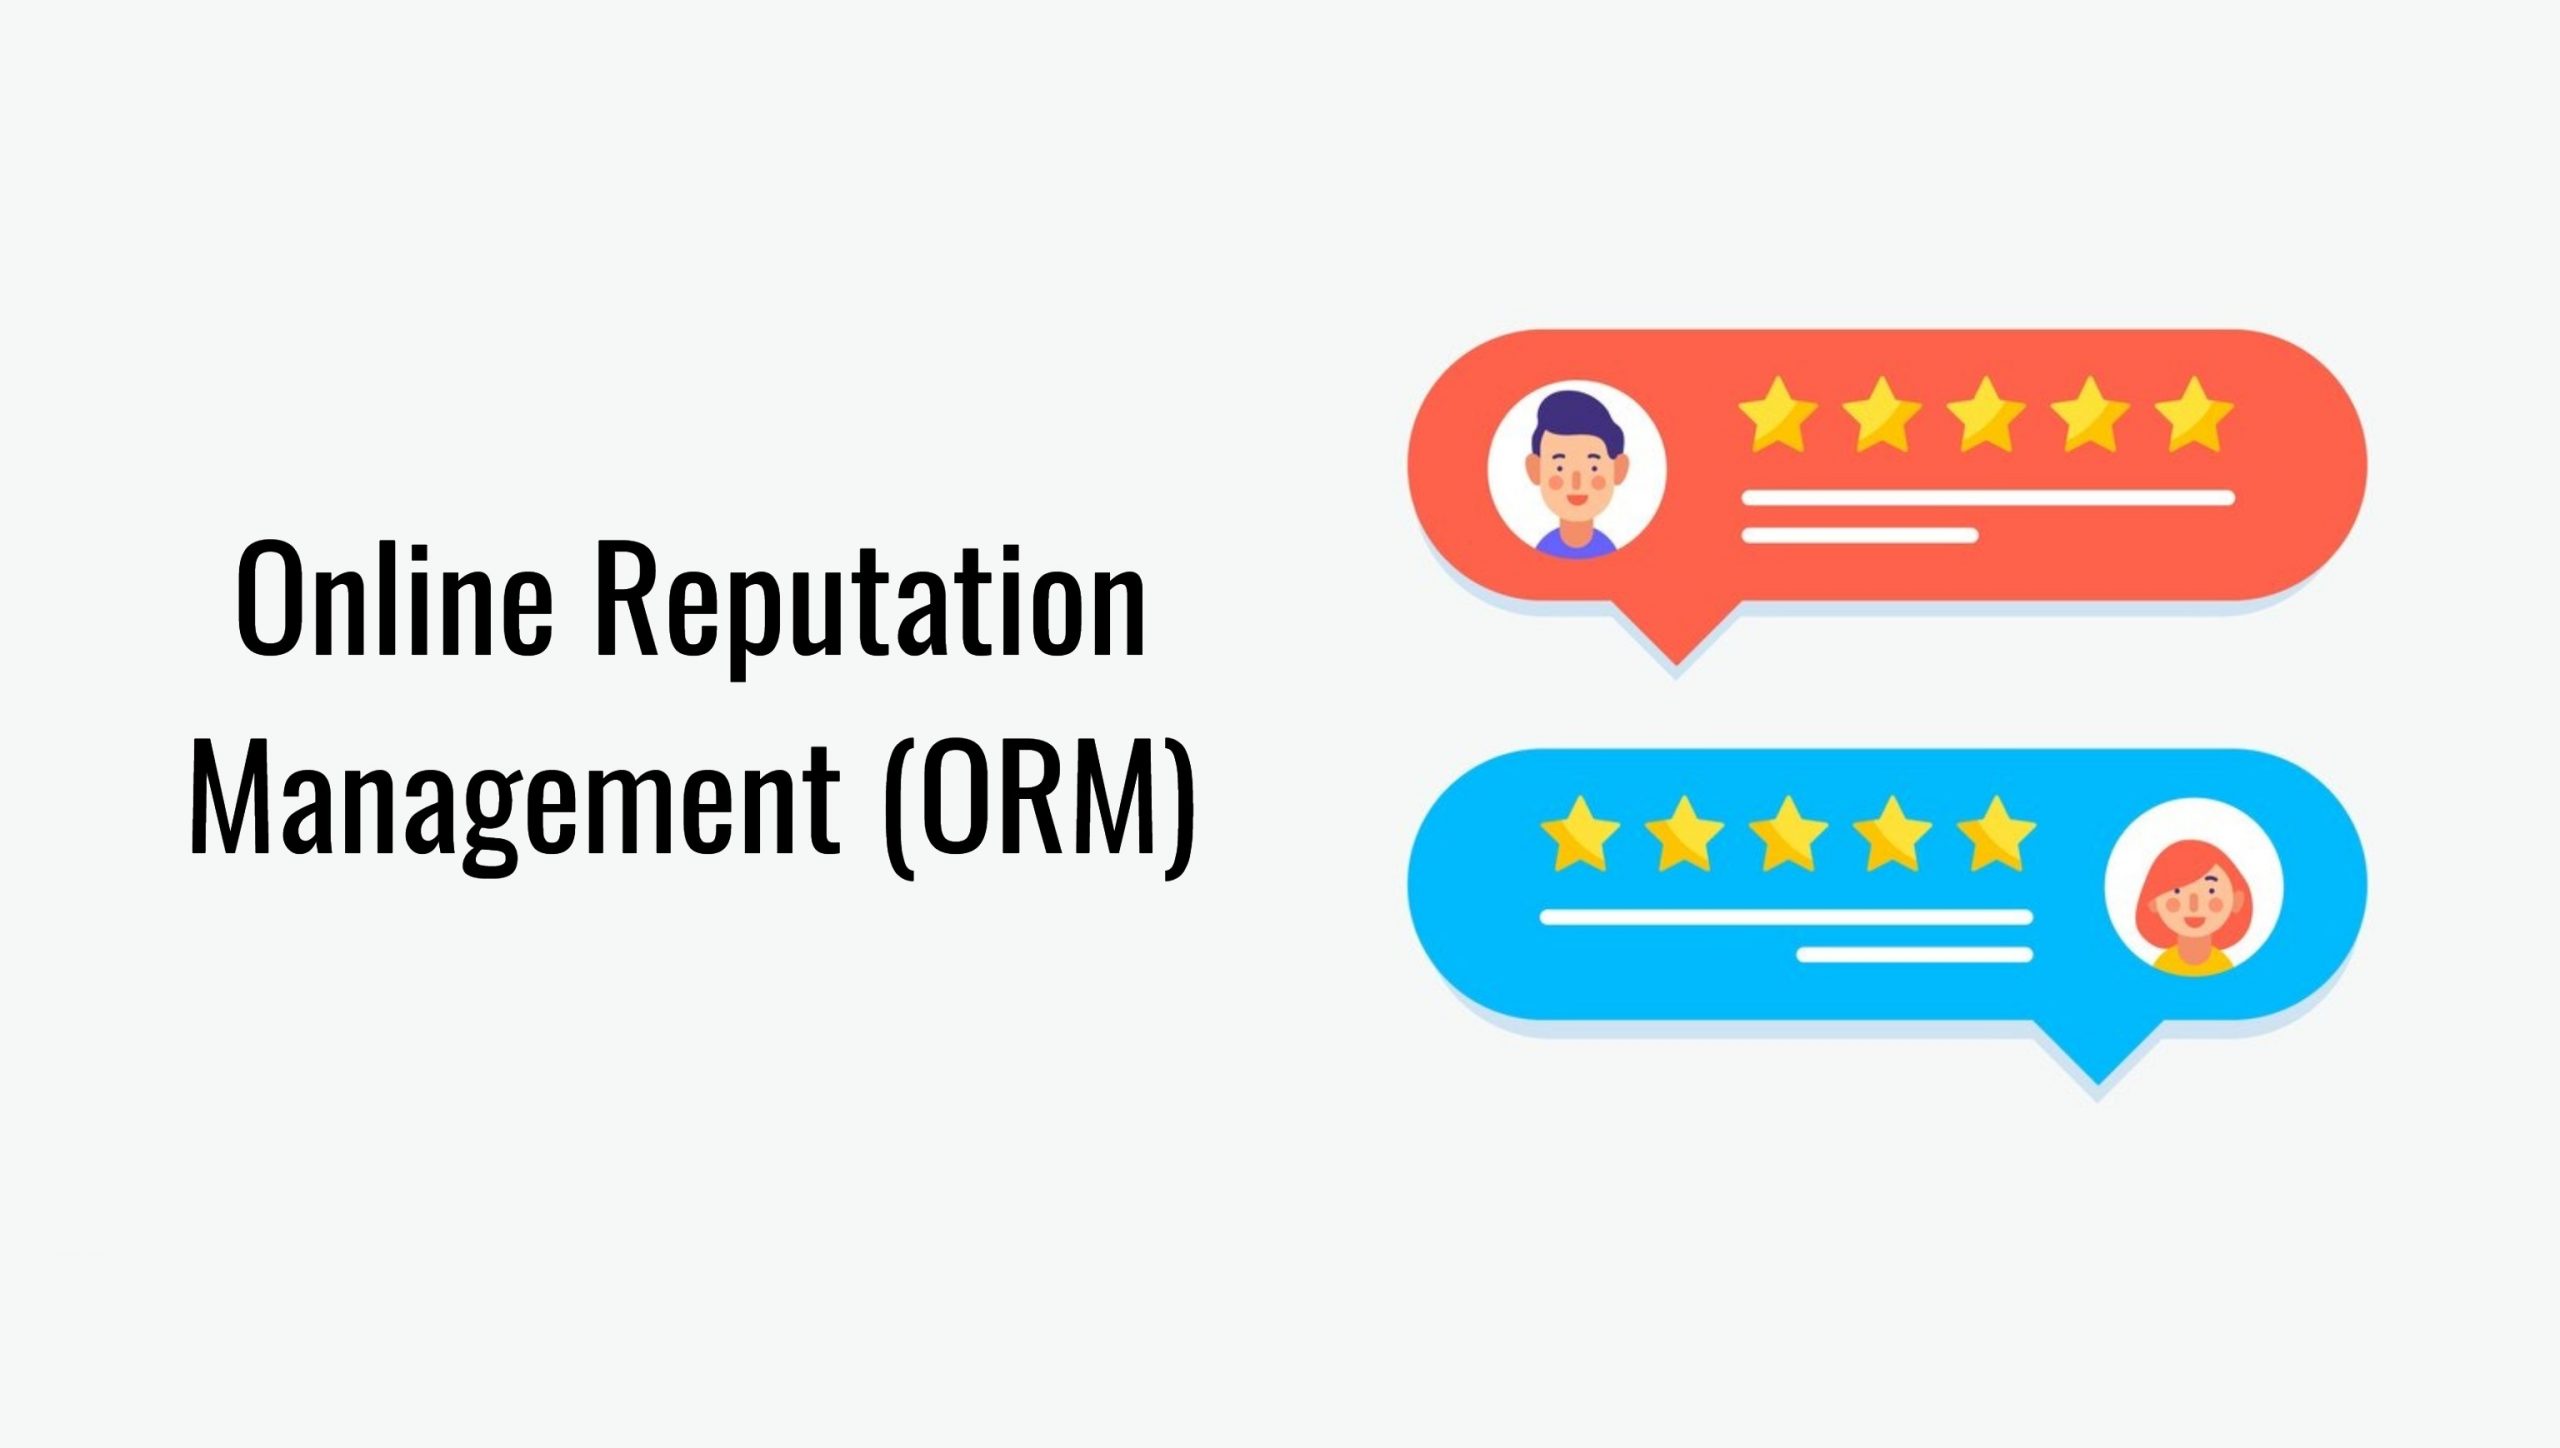 What-is-ORM-and-How-Does-Online-Reputation-Management-Work-WebMatriks-Blog-News-About-SEO-Digital-Marketing-Social-Media-updates.jpg